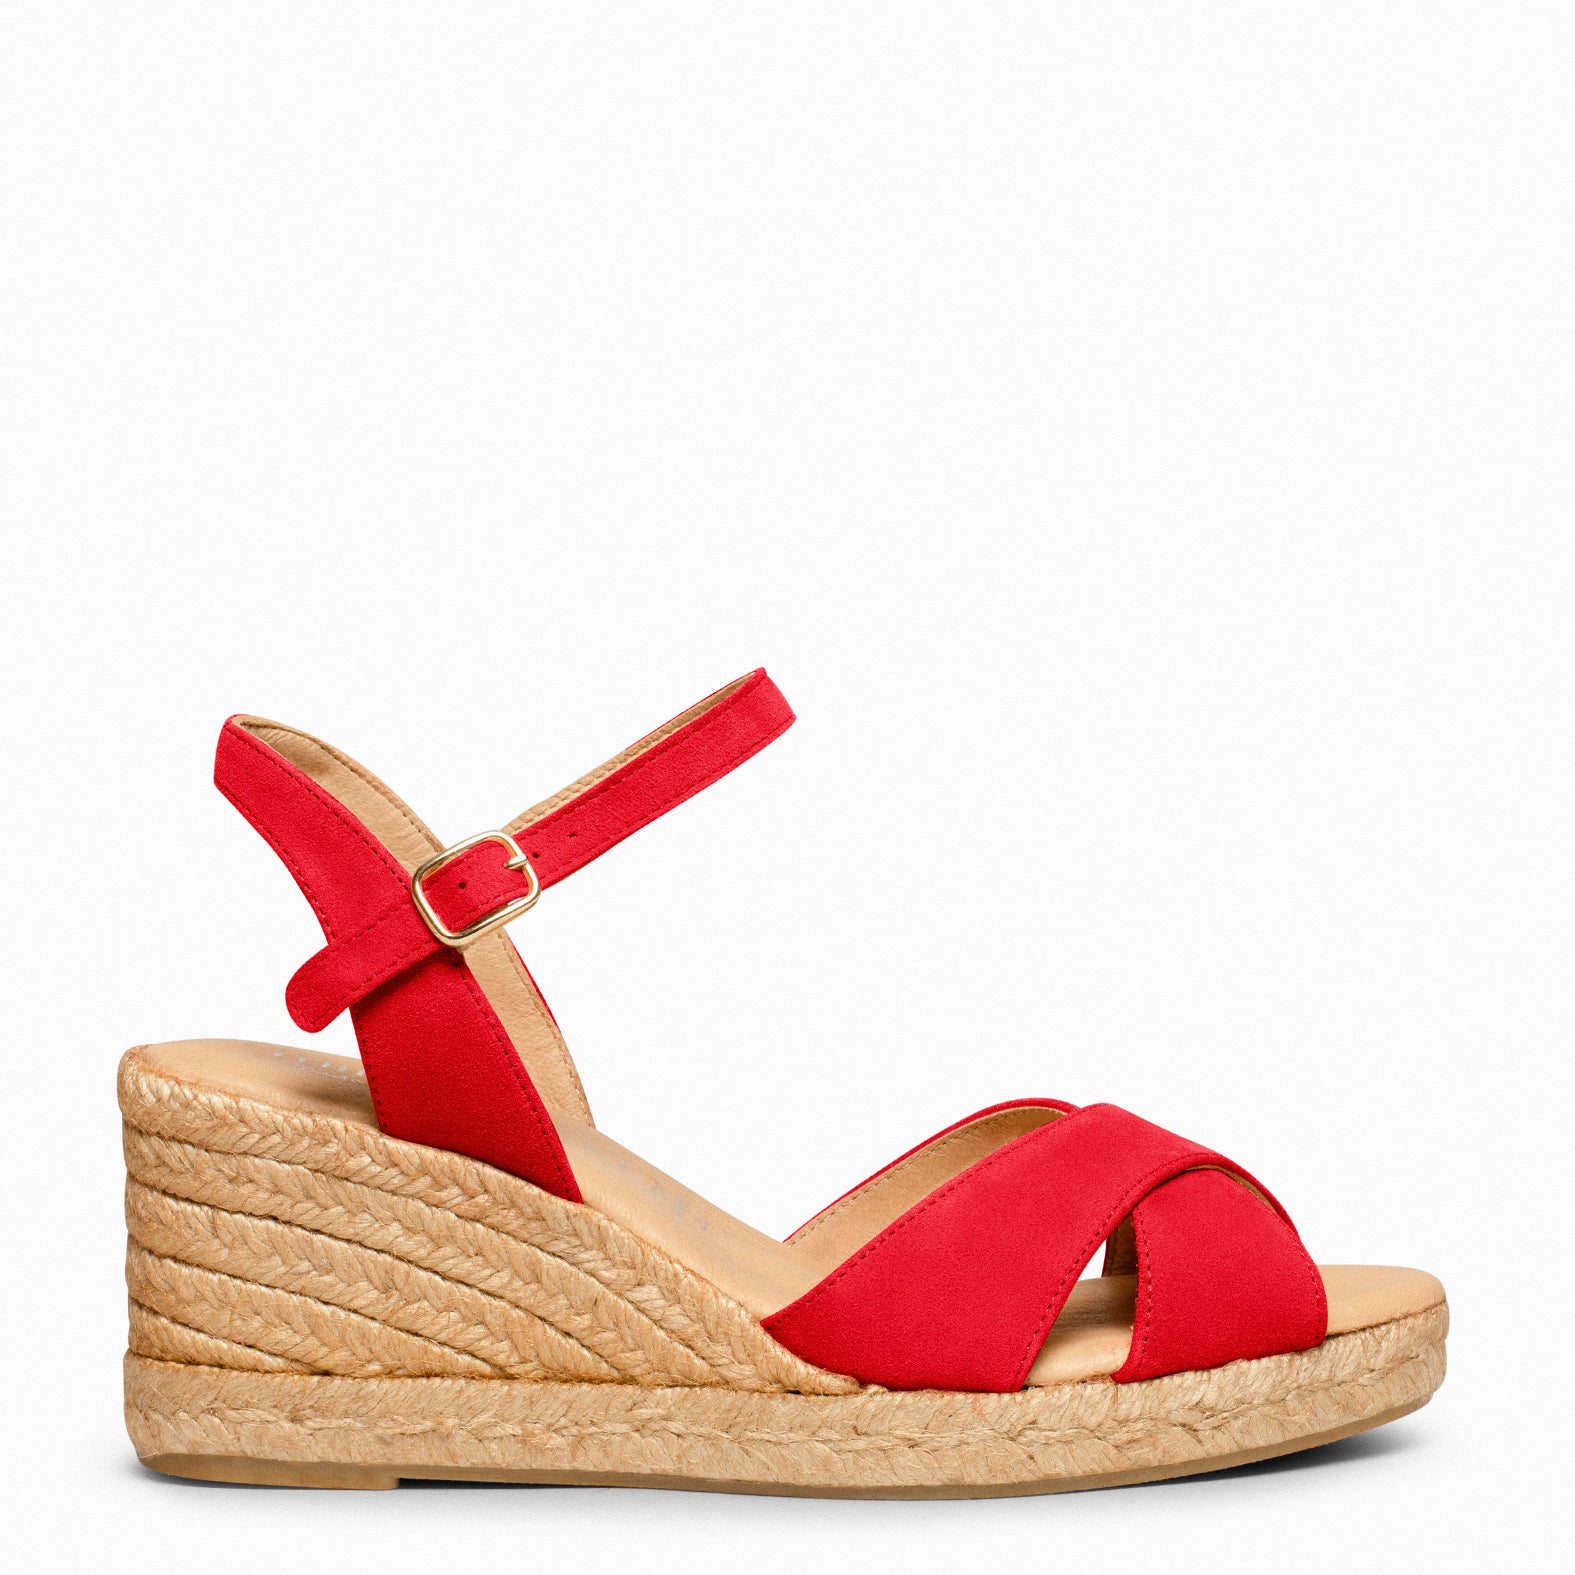 CALPE – RED suede leather espadrille